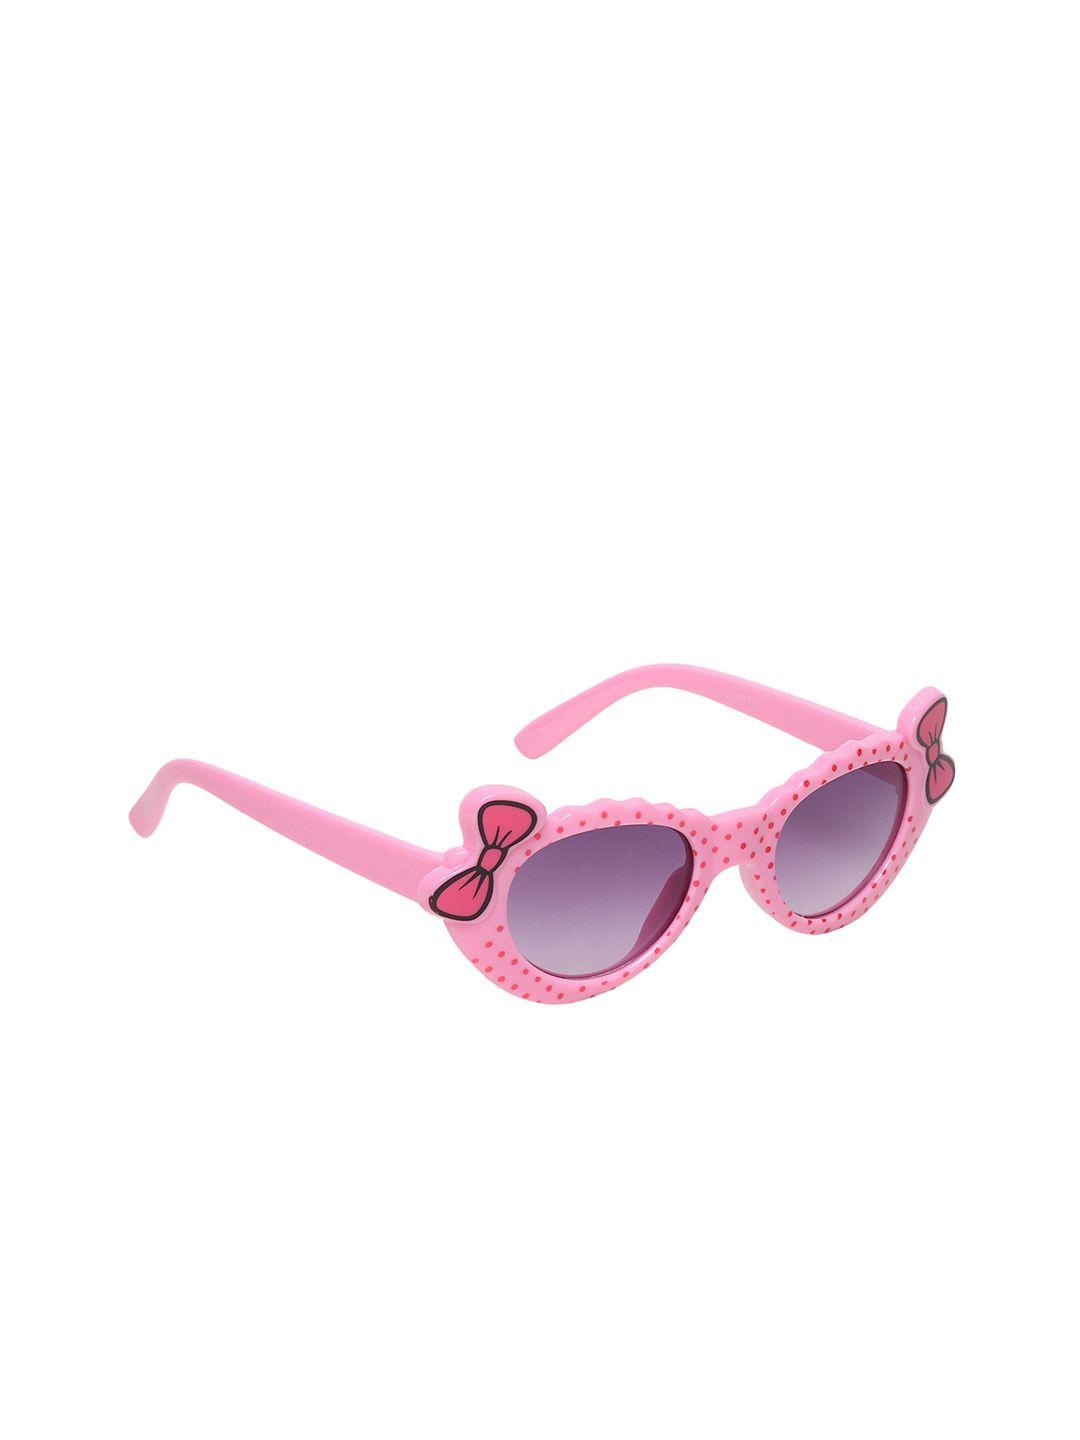 criba unisex grey lens & pink other sunglasses with uv protected lens